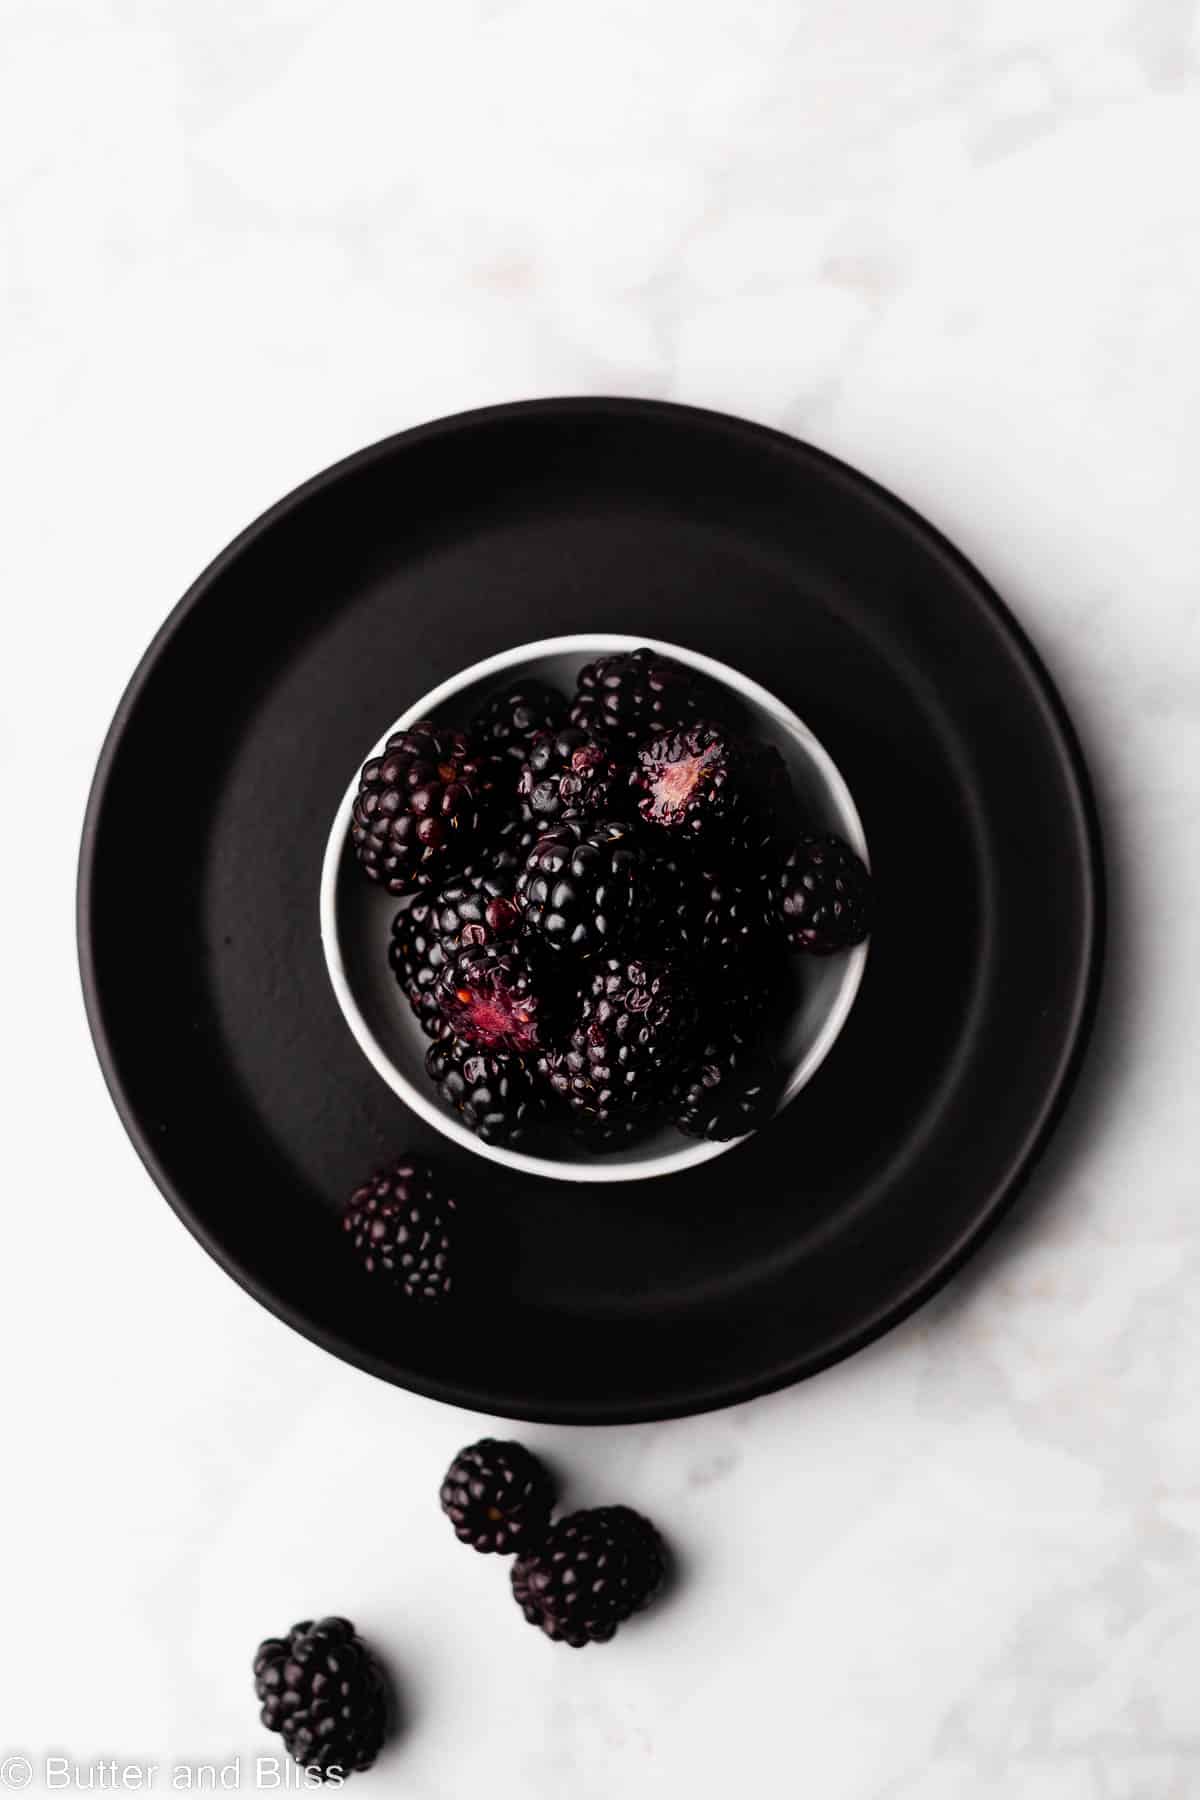 A dramatic photo of pretty blackberries in a bowl set on a black plate.